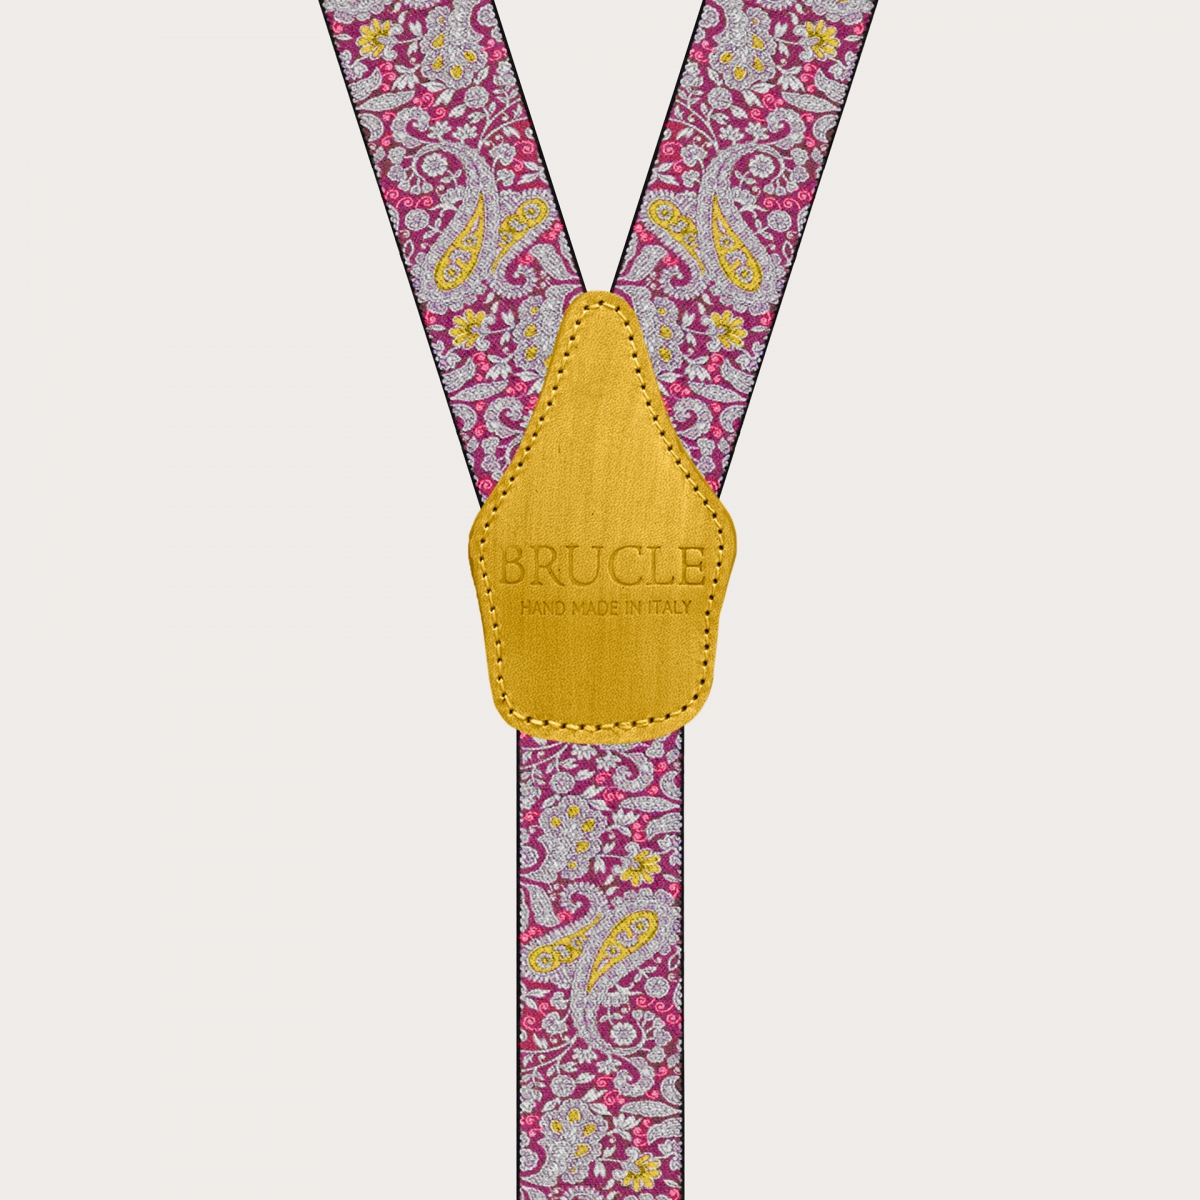 BRUCLE Suspenders with clips in magenta and yellow cashmere pattern